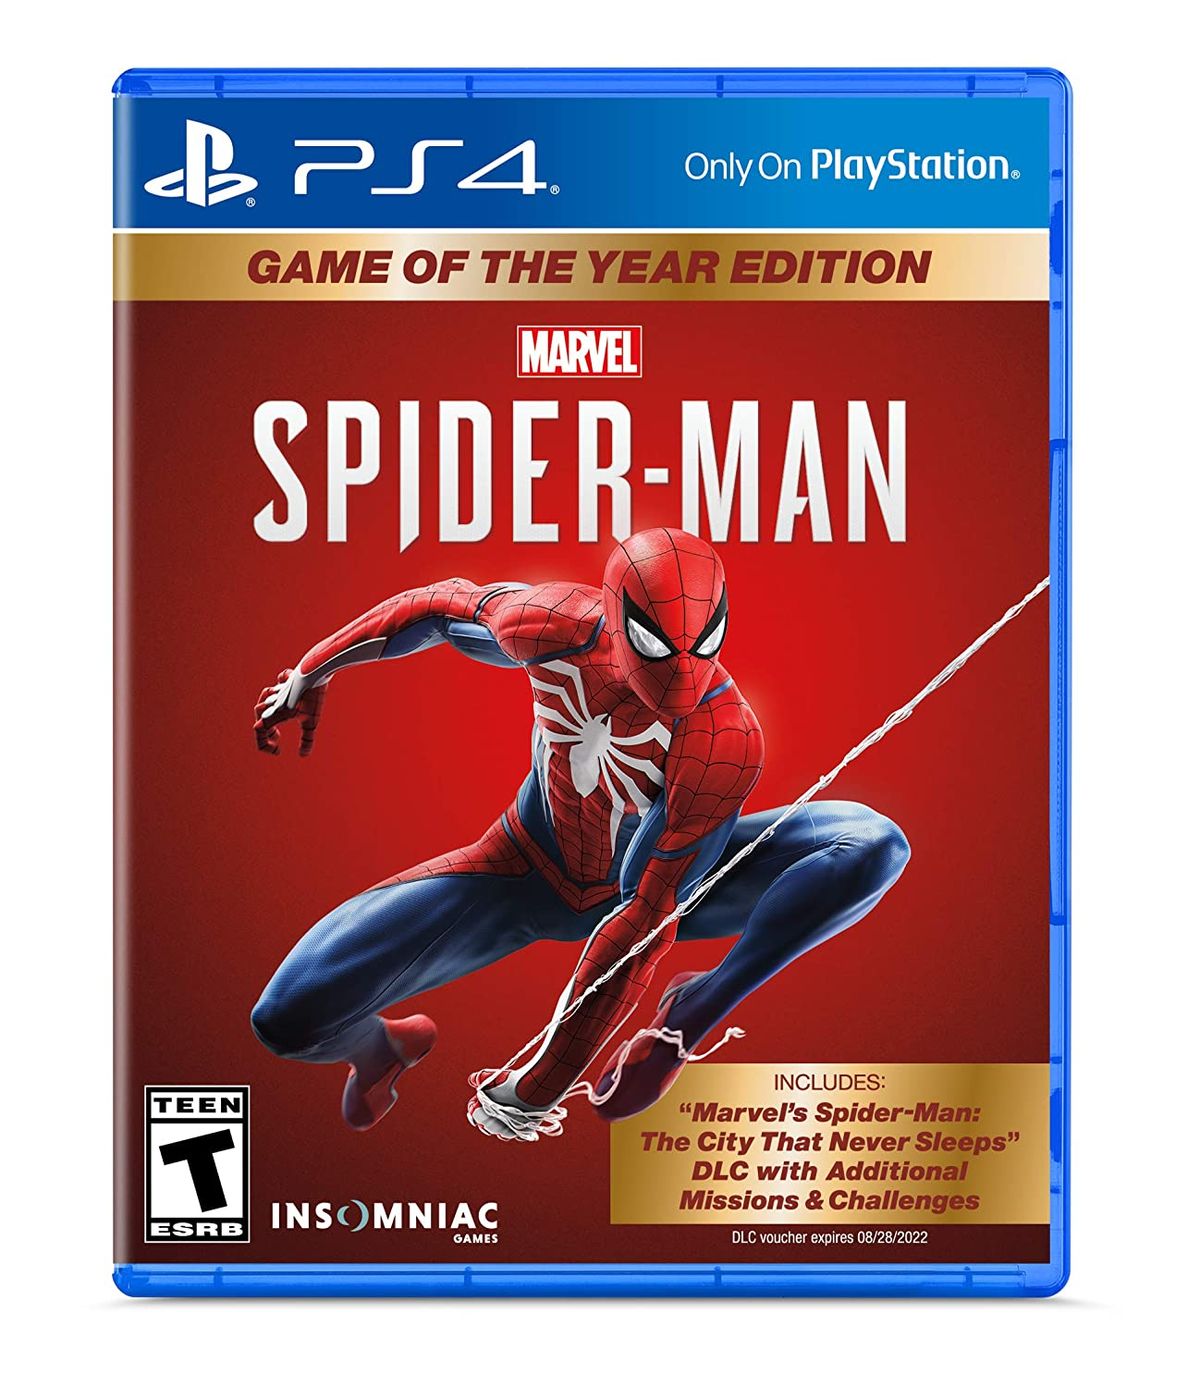 ps4 games coming soon amazon